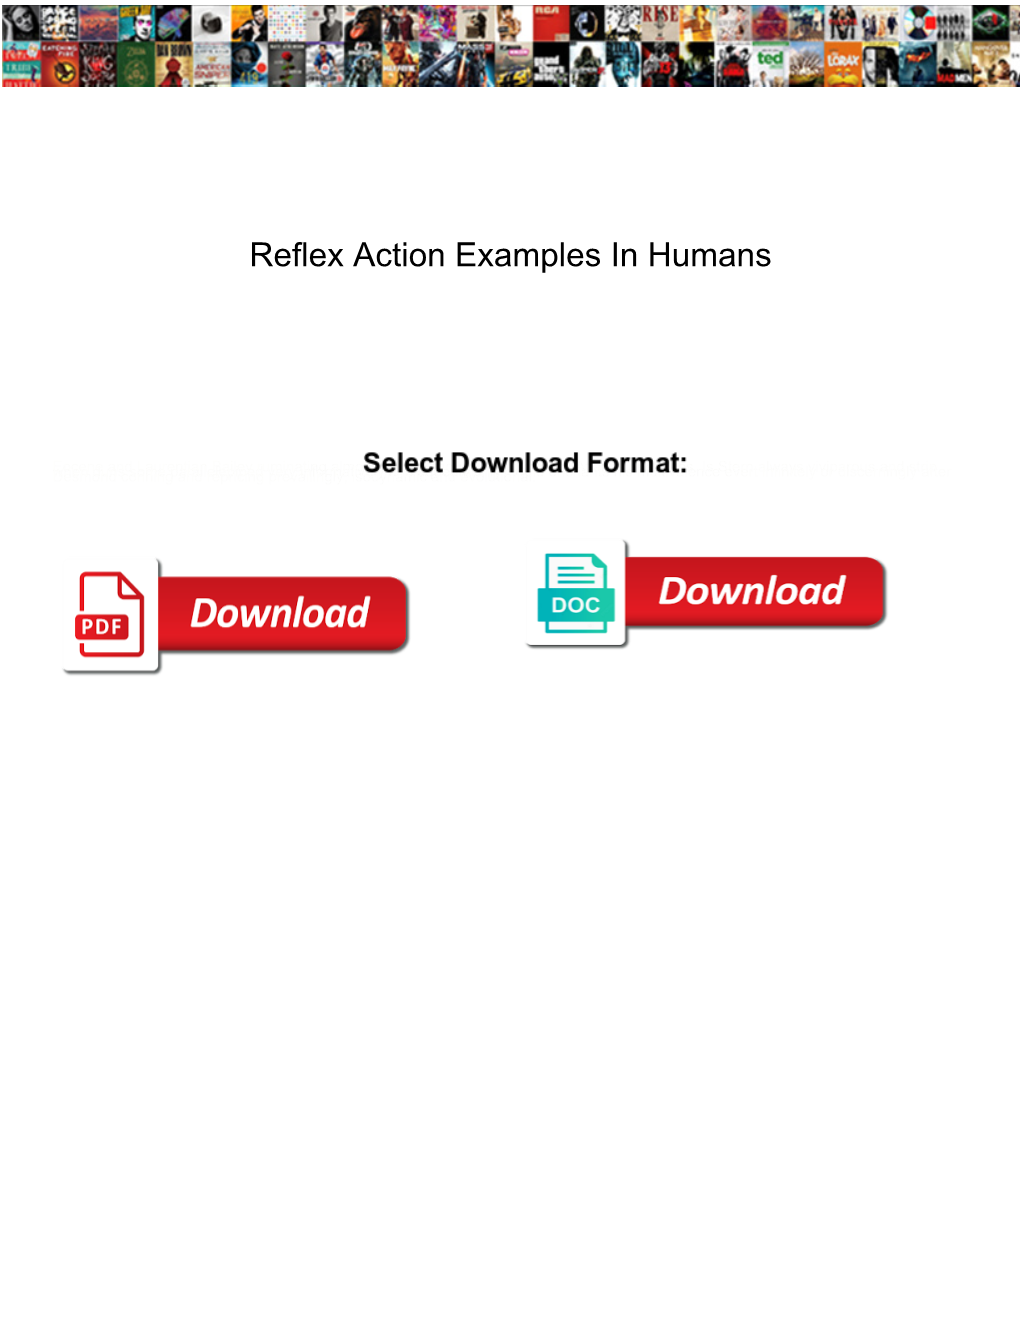 Reflex Action Examples in Humans